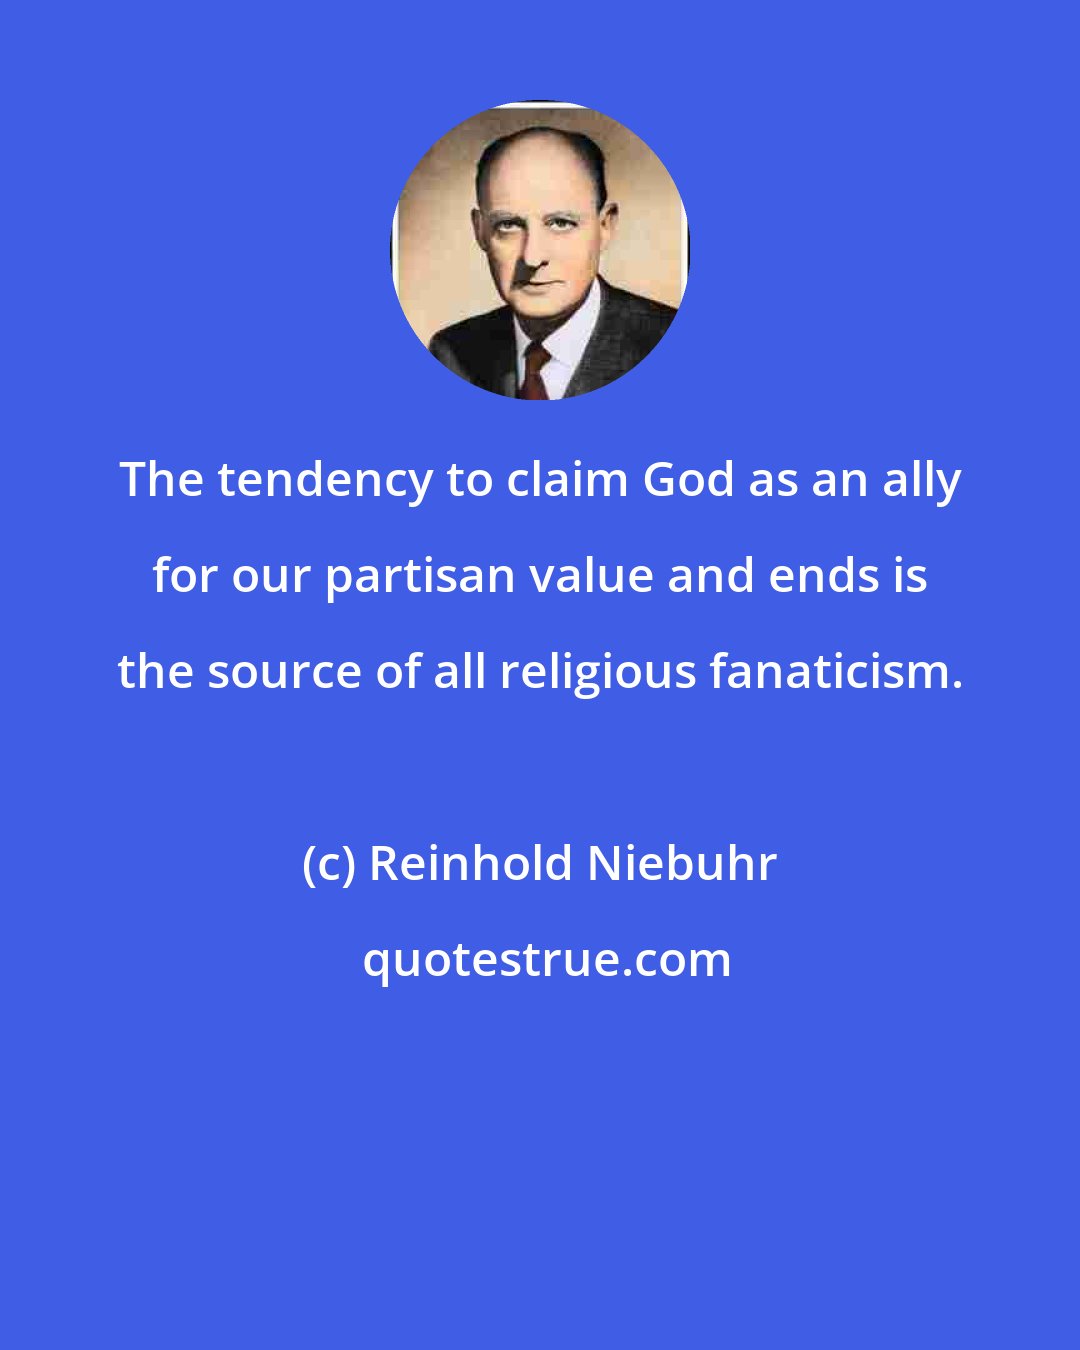 Reinhold Niebuhr: The tendency to claim God as an ally for our partisan value and ends is the source of all religious fanaticism.